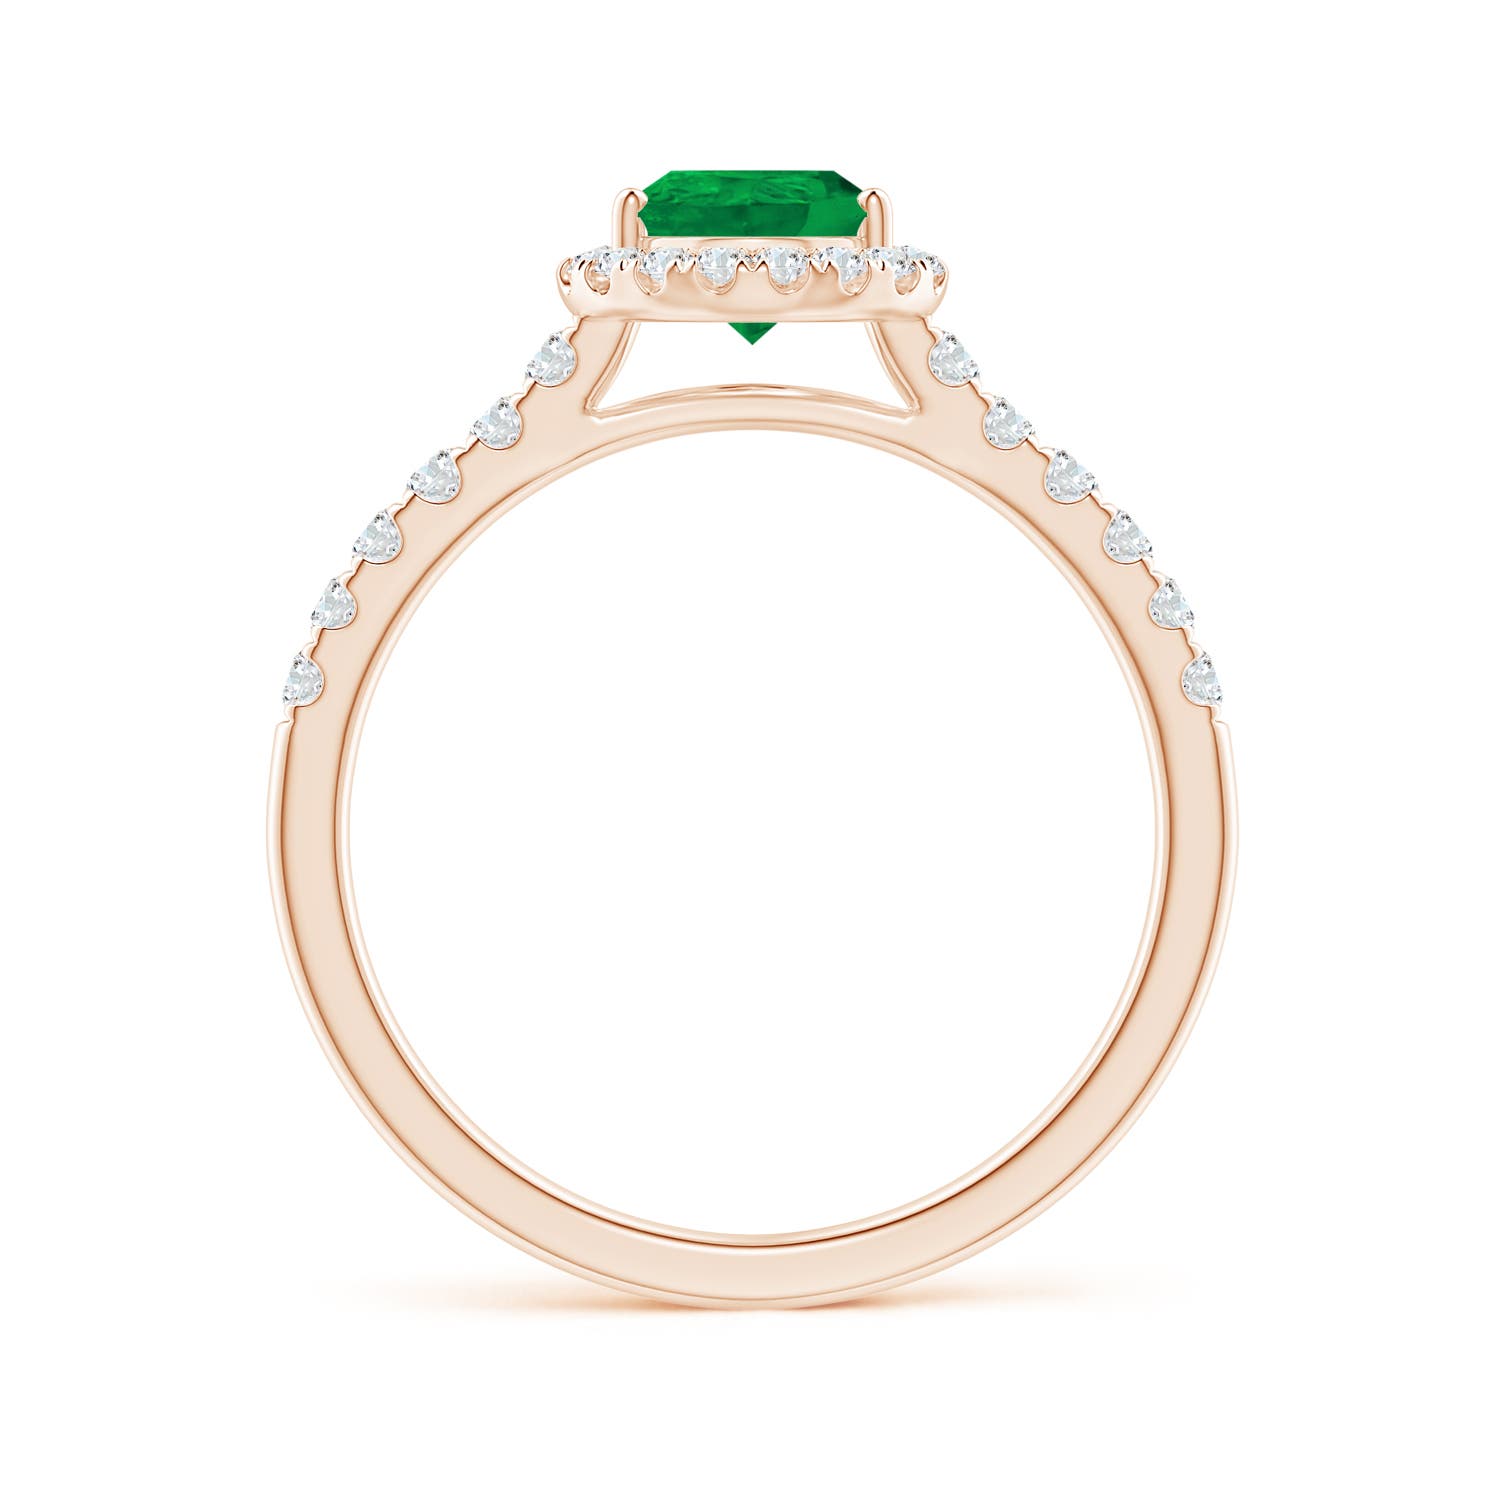 AA - Emerald / 1.32 CT / 14 KT Rose Gold